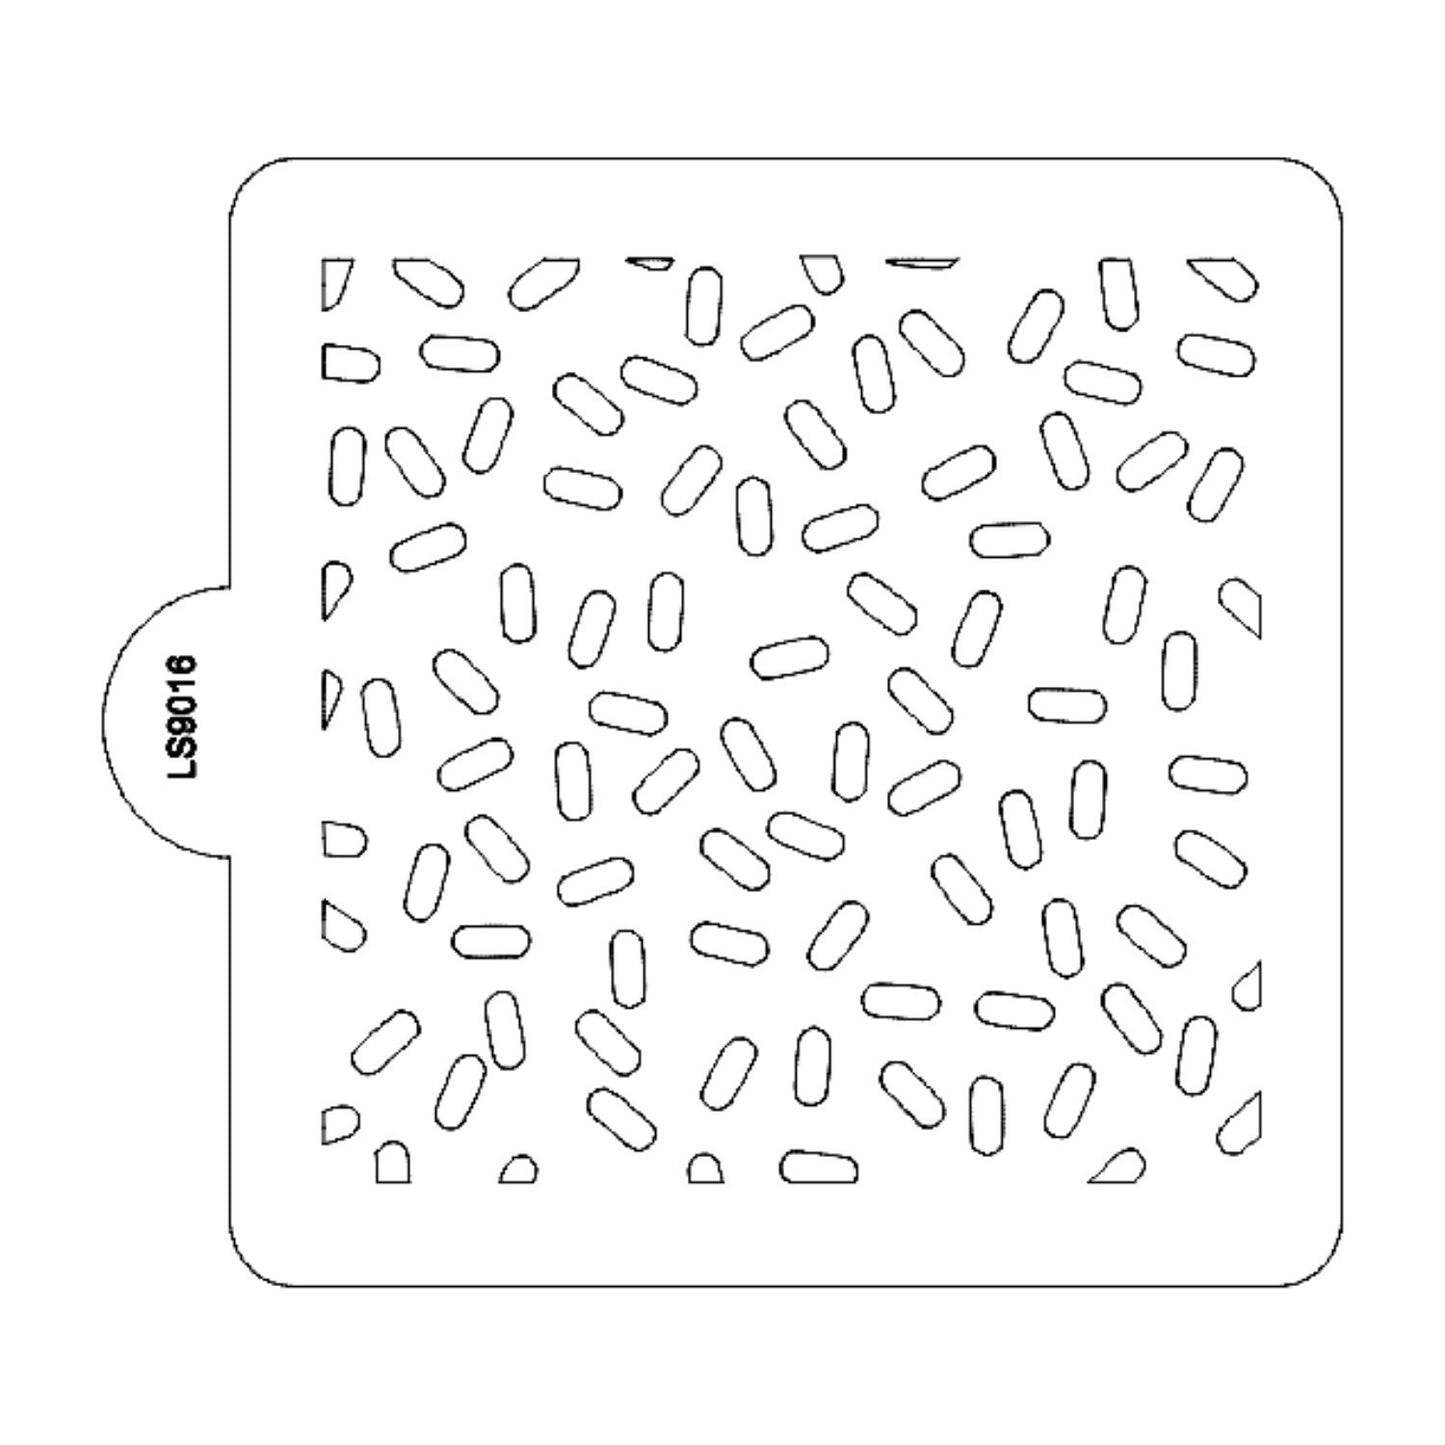 Sprinkles Topping Pattern Stencil for Cookies or Cakes USA Made LS9016